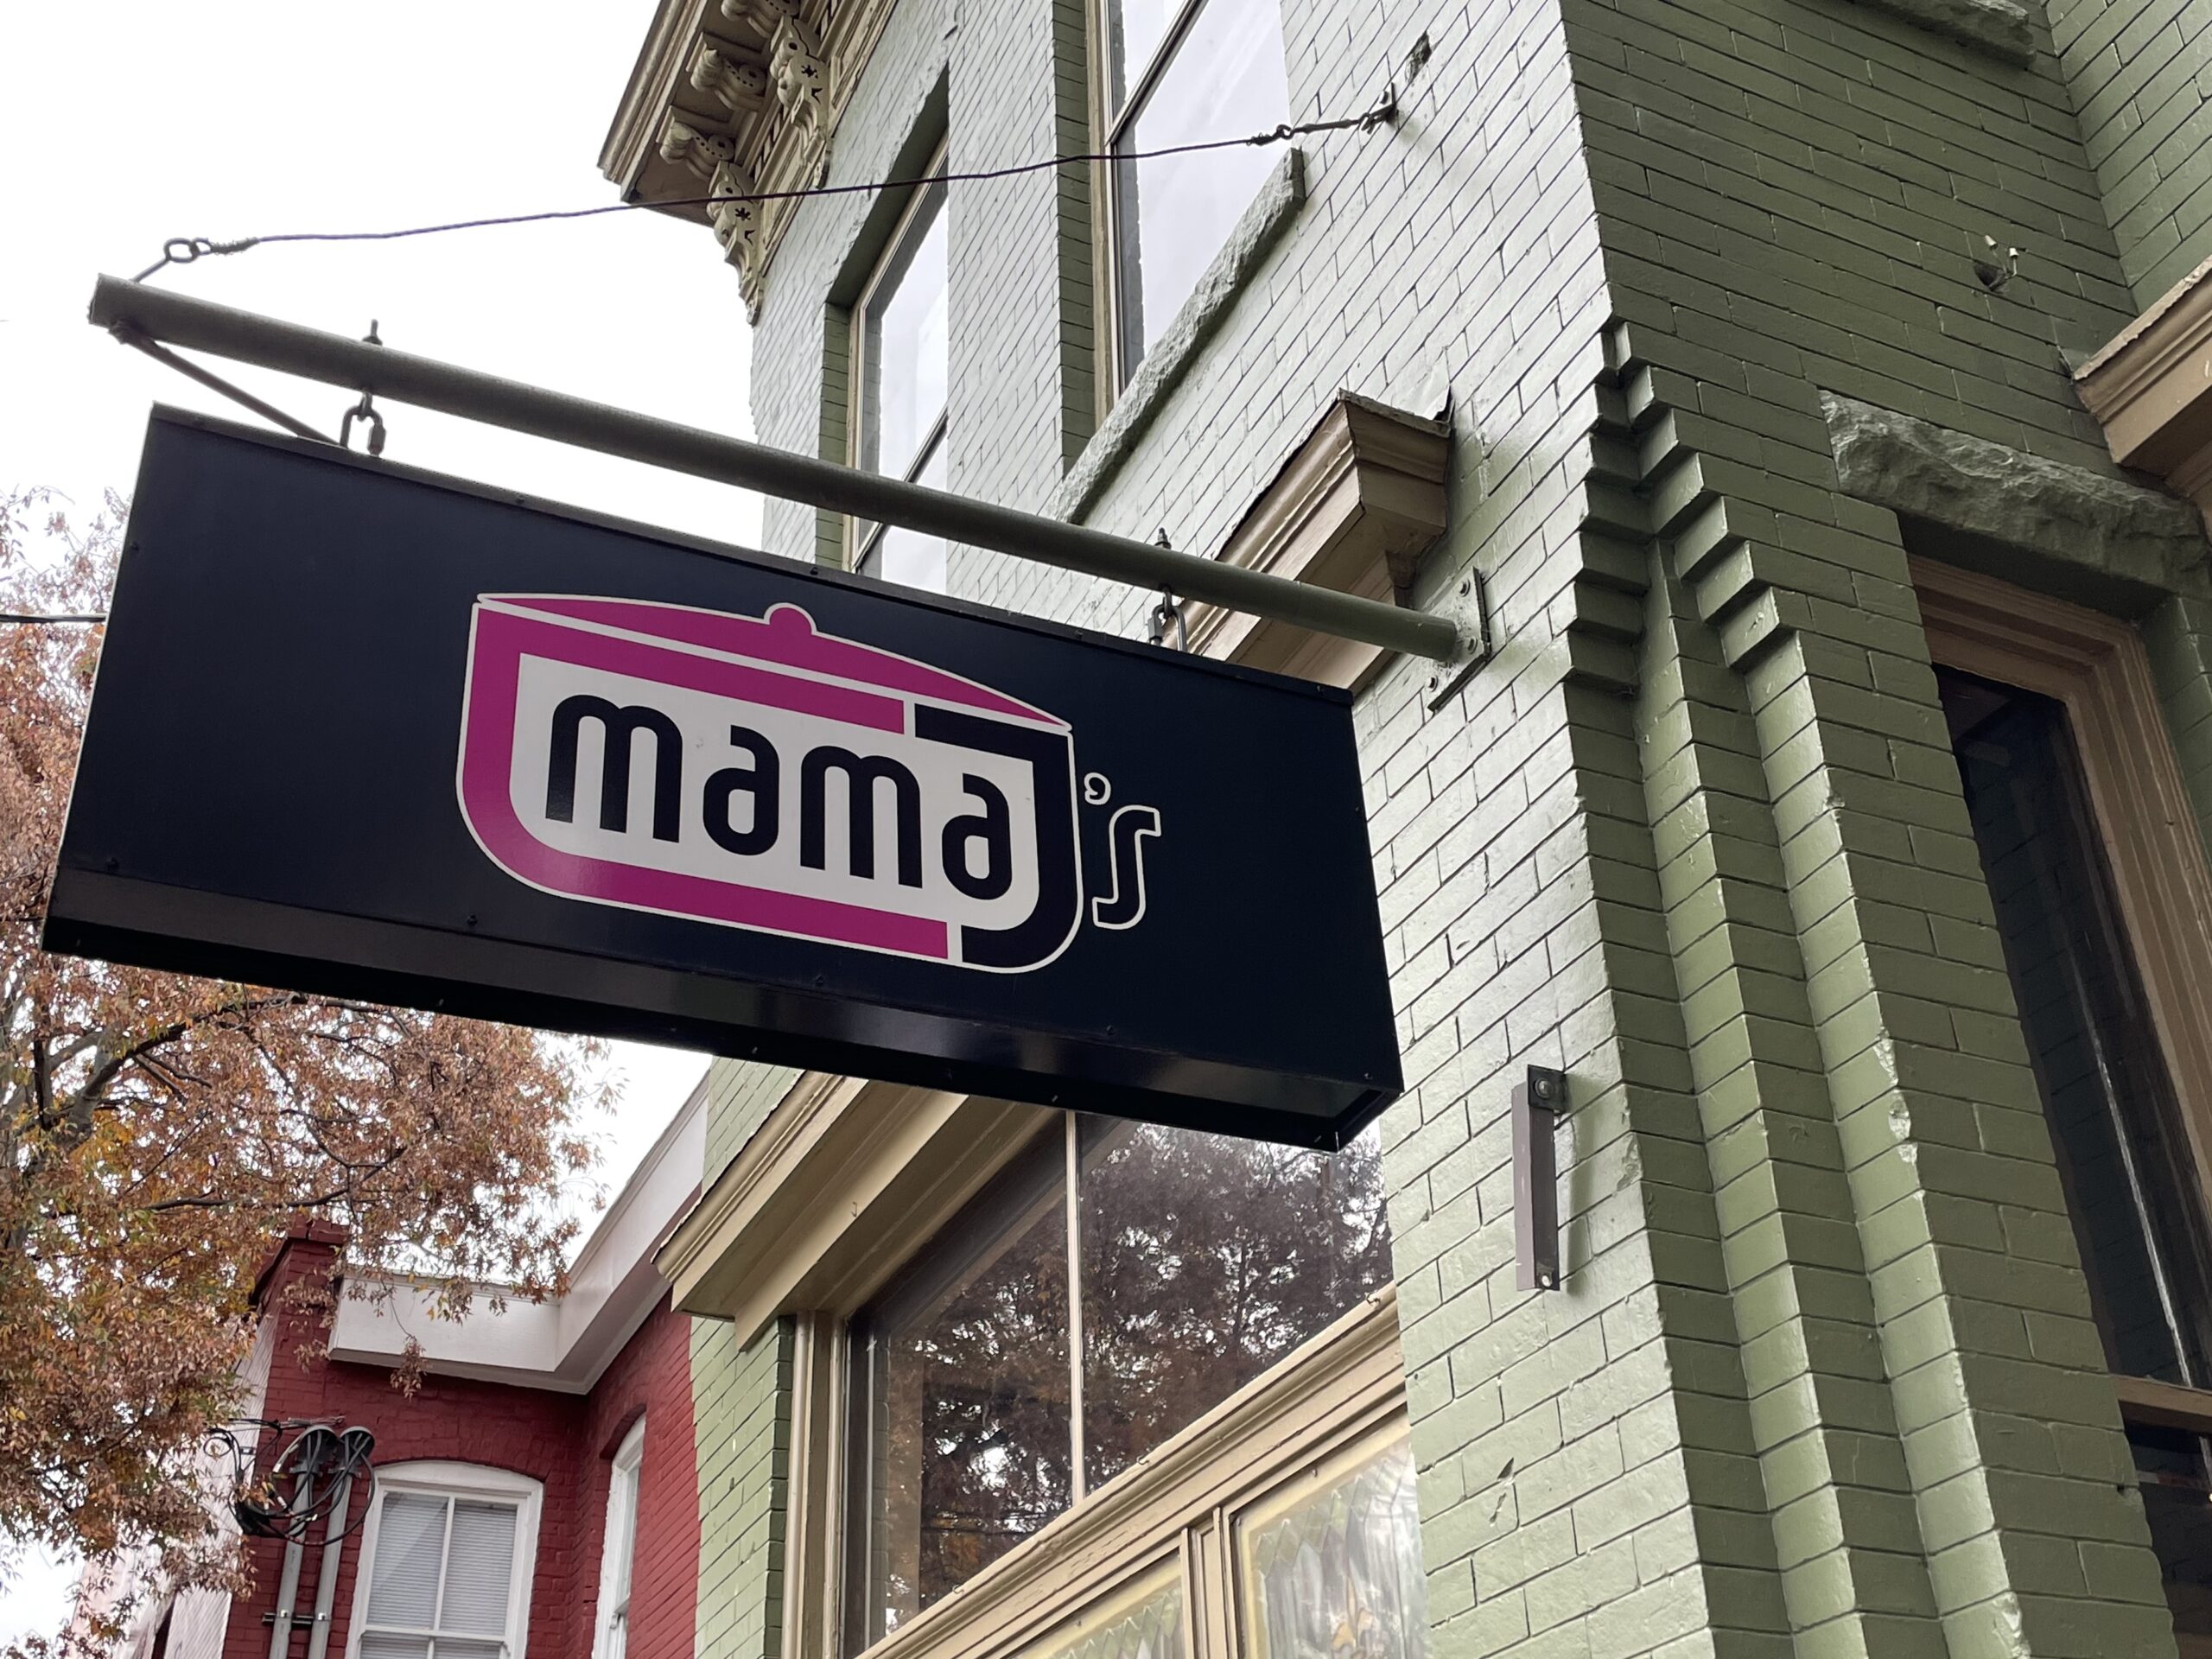 Mama J's expanding in Jackson Ward with new Mama J's Market